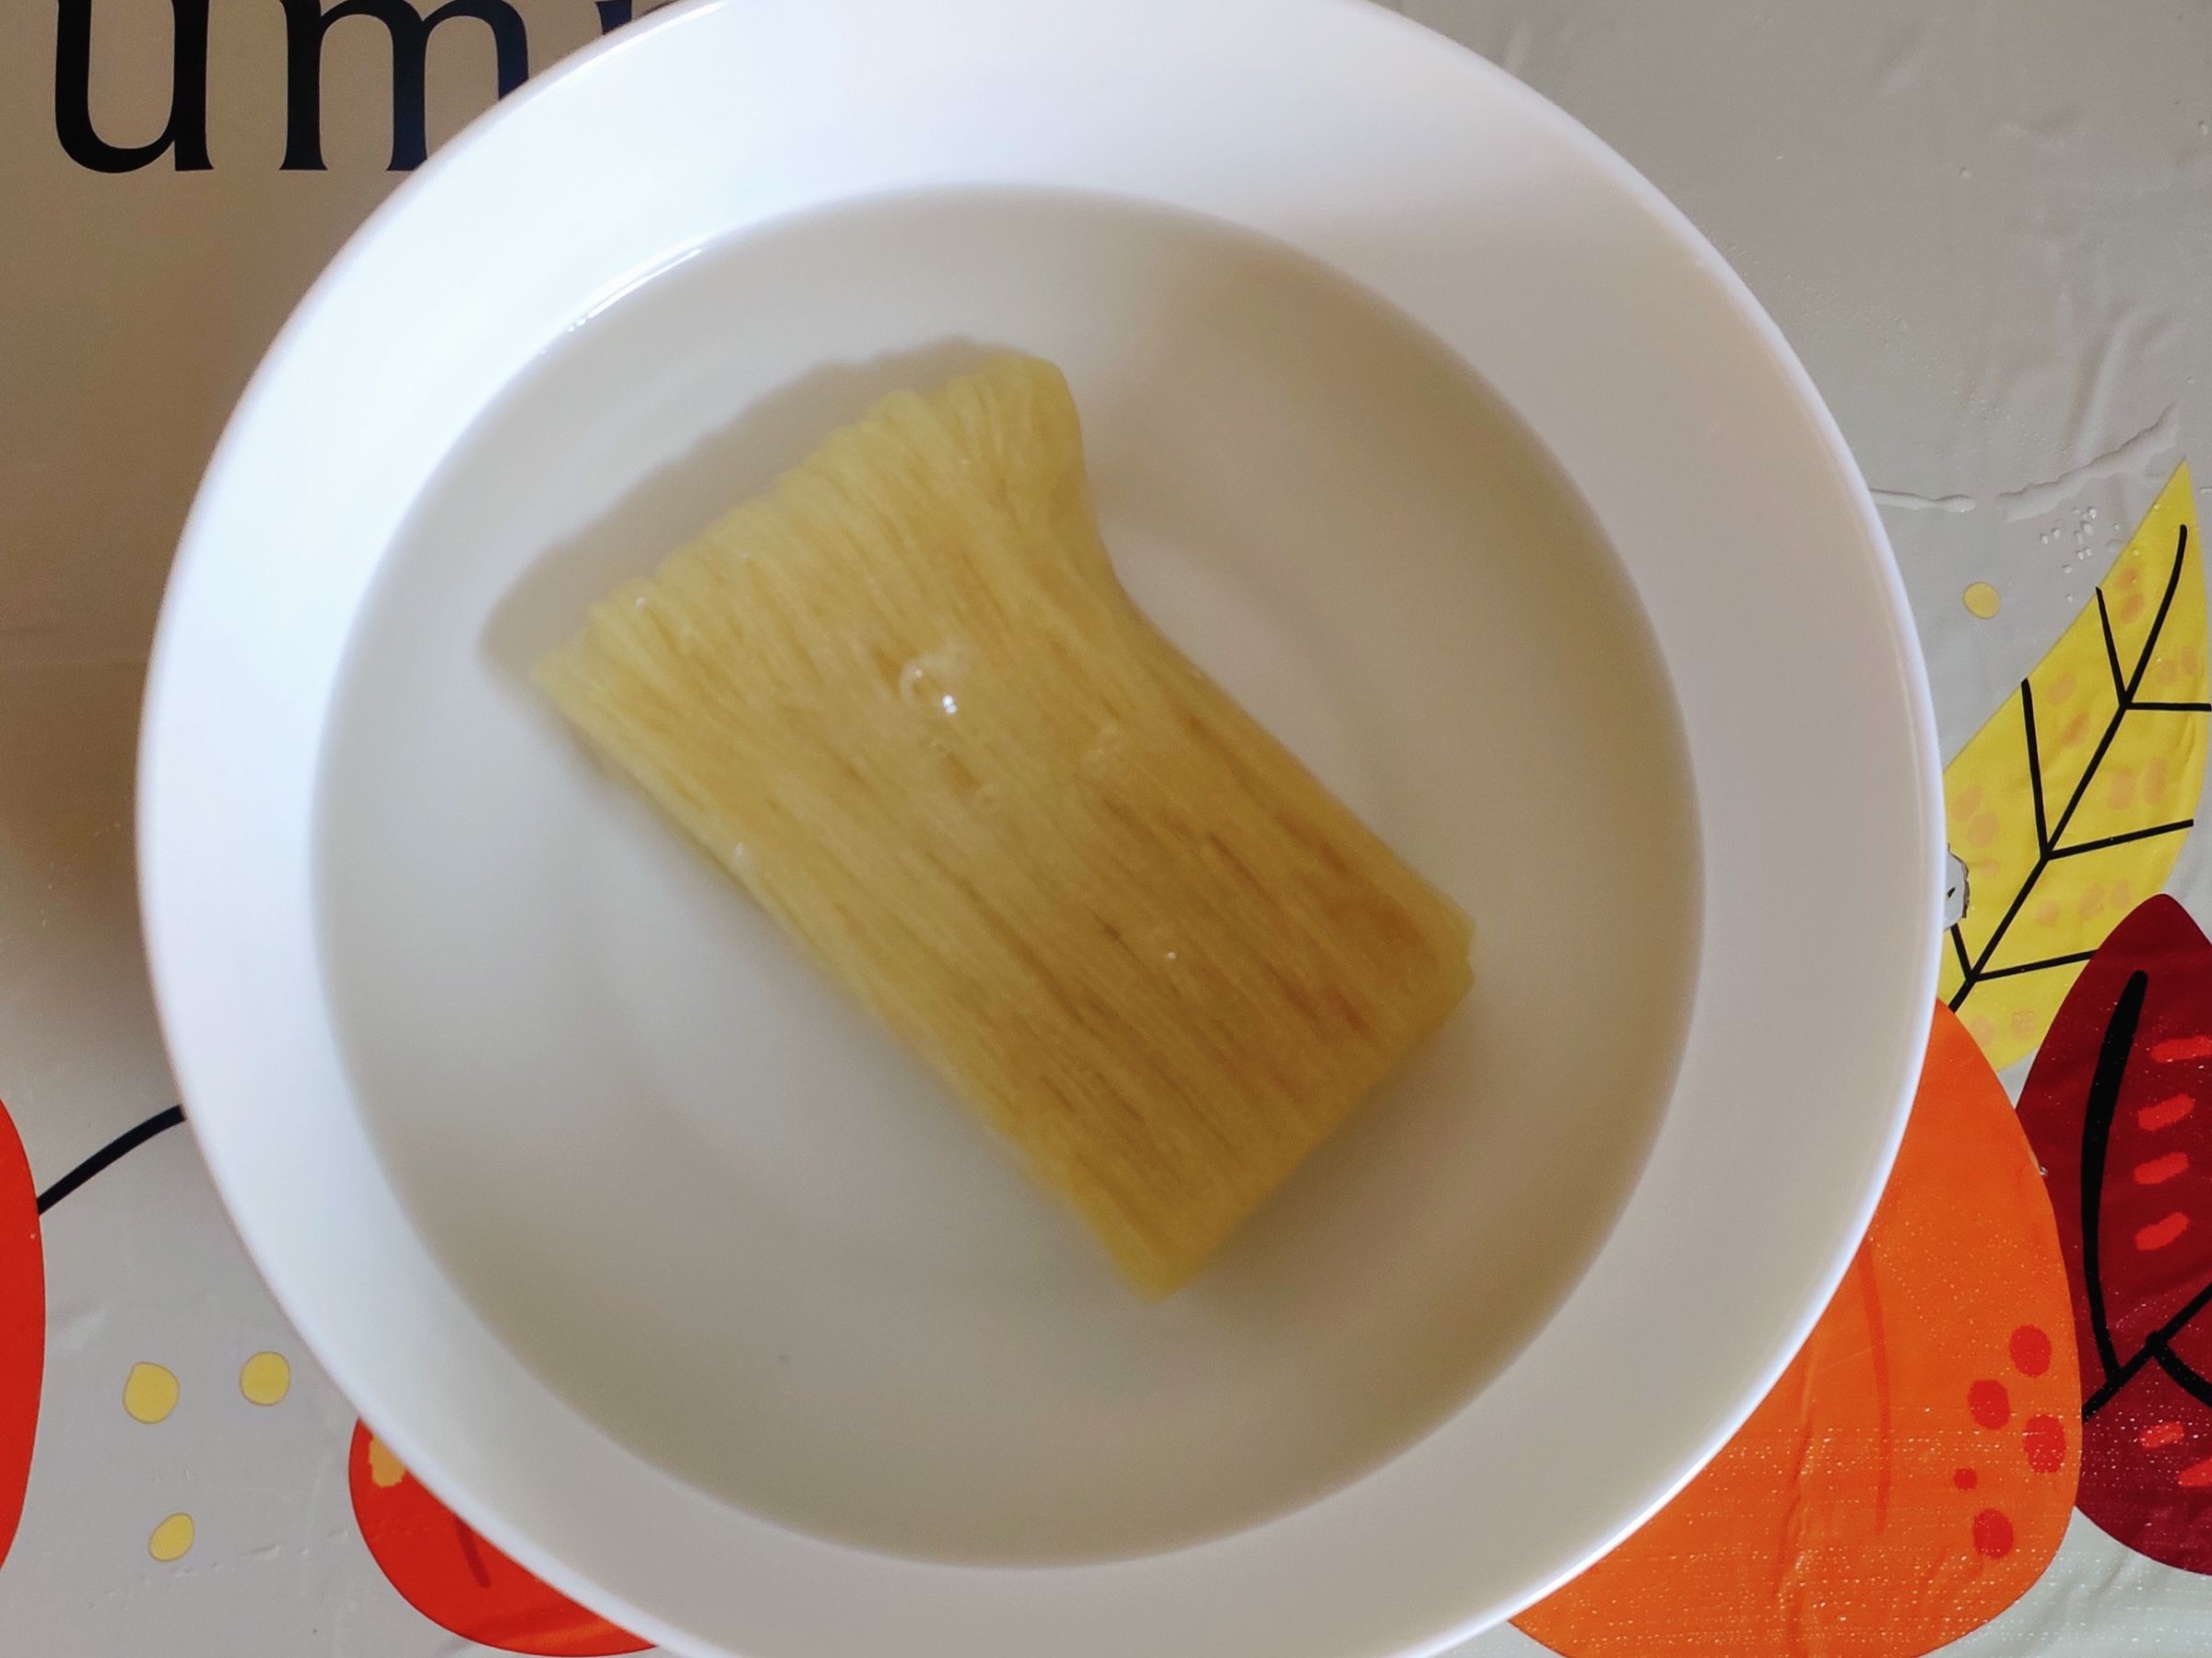 Noodles are Going to be Eaten Like this recipe